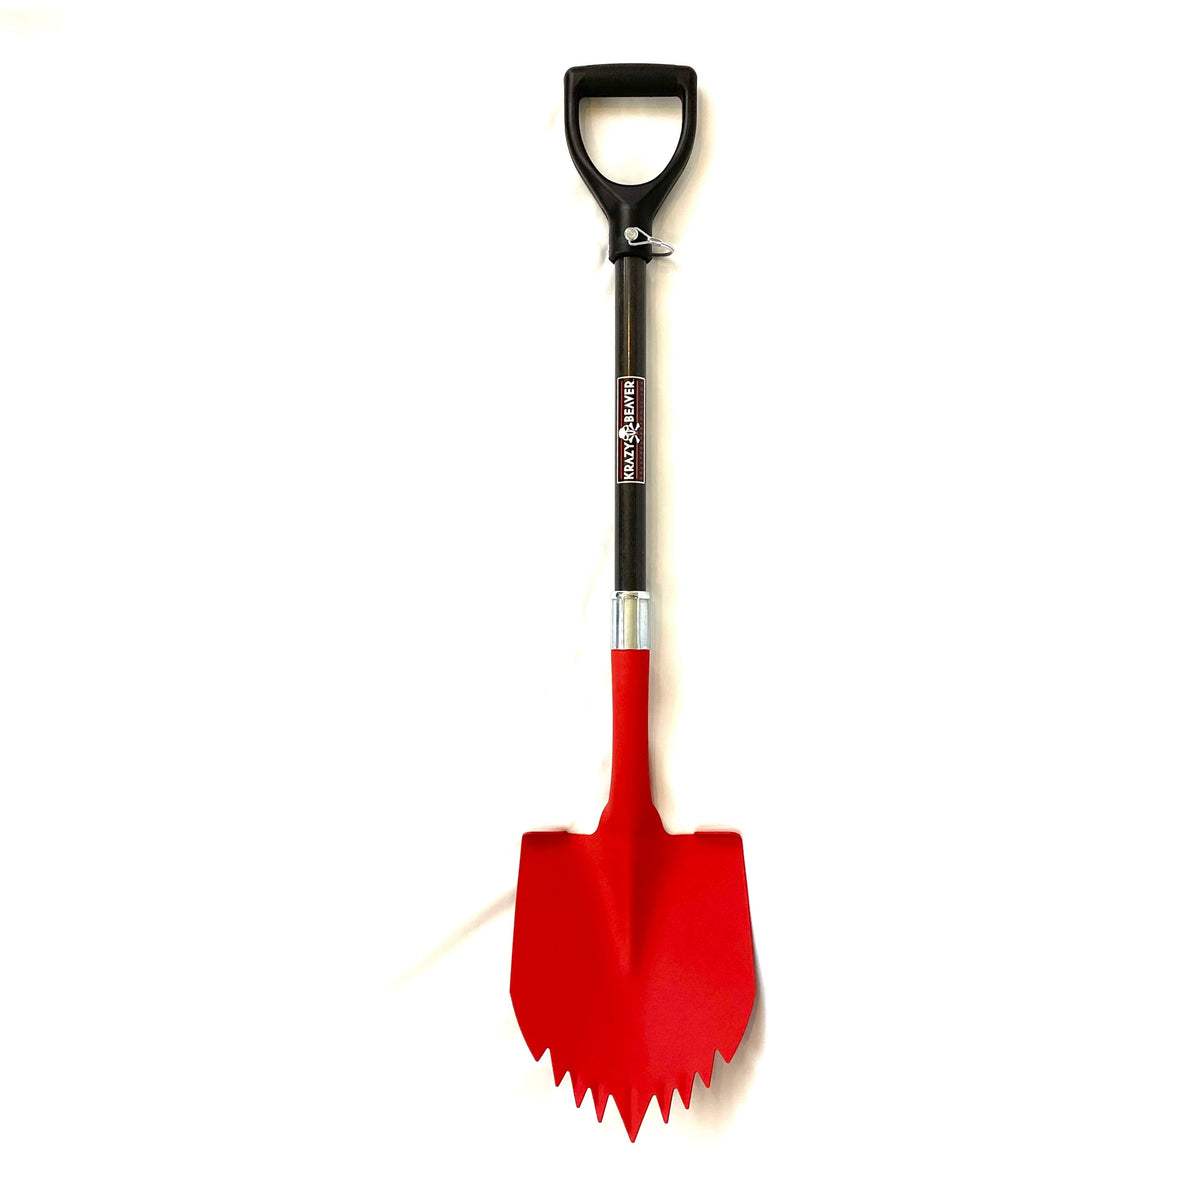 Krazy Beaver Shovel (Textured Red Head / Black Handle 45636)  Recovery Gear, Camping gear, Shovel, Camping Krazy Beaver Tools- Overland Kitted